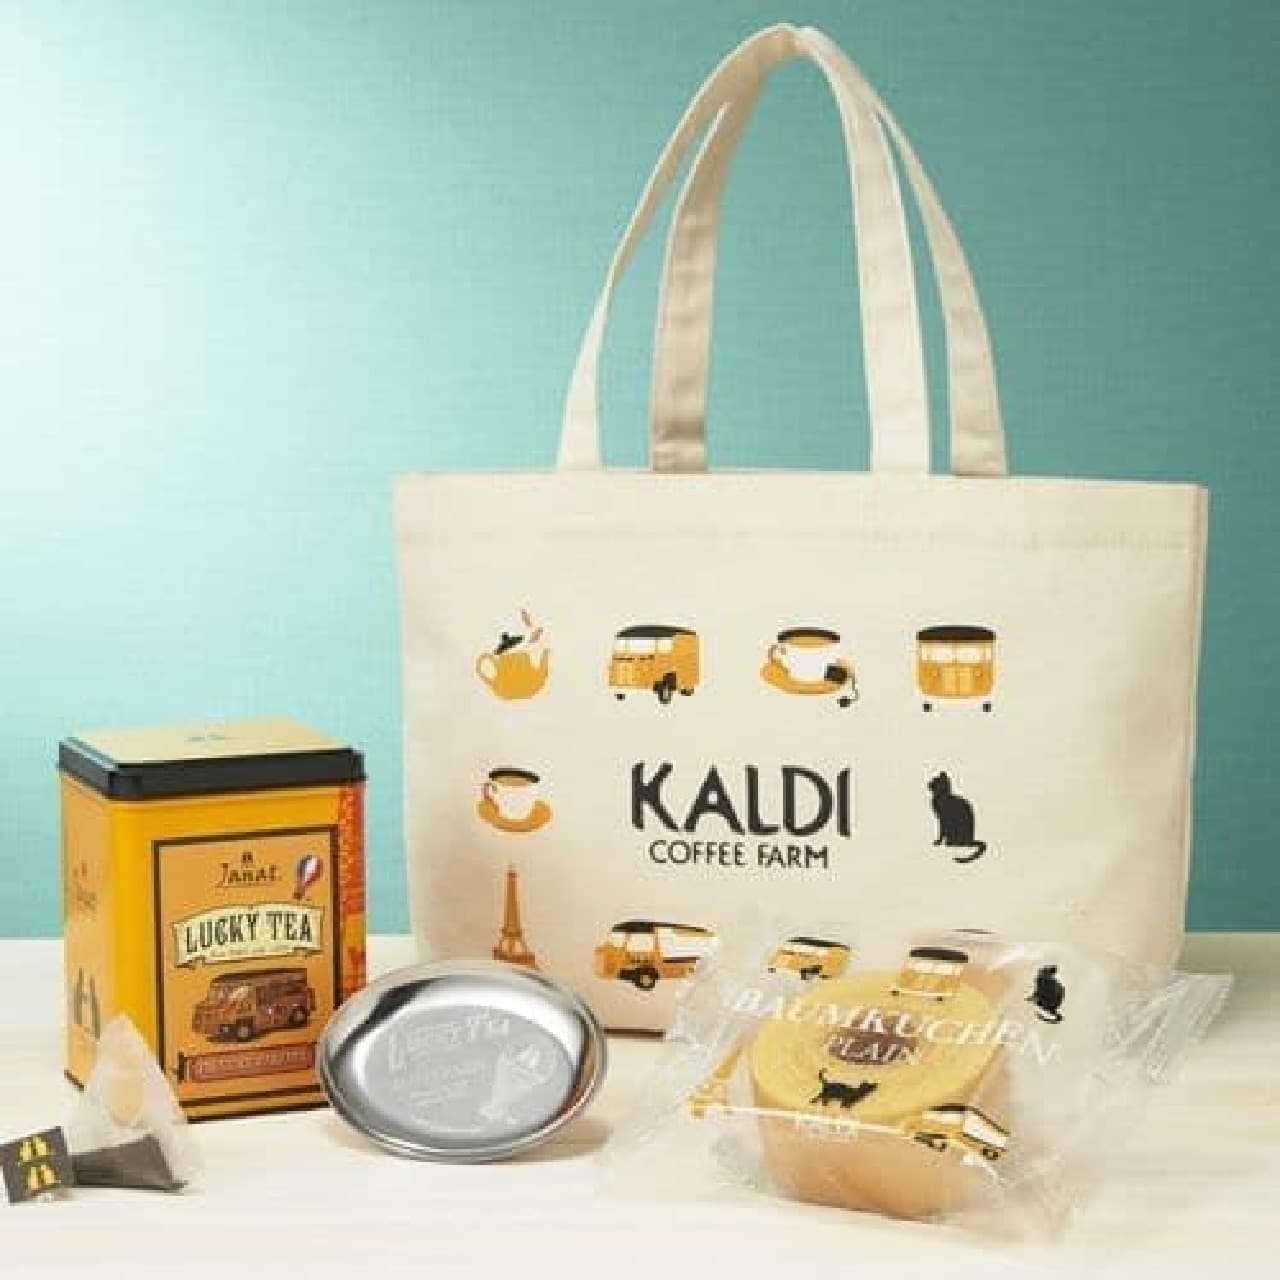 Limited number of "Tea Day Bags" for KALDI